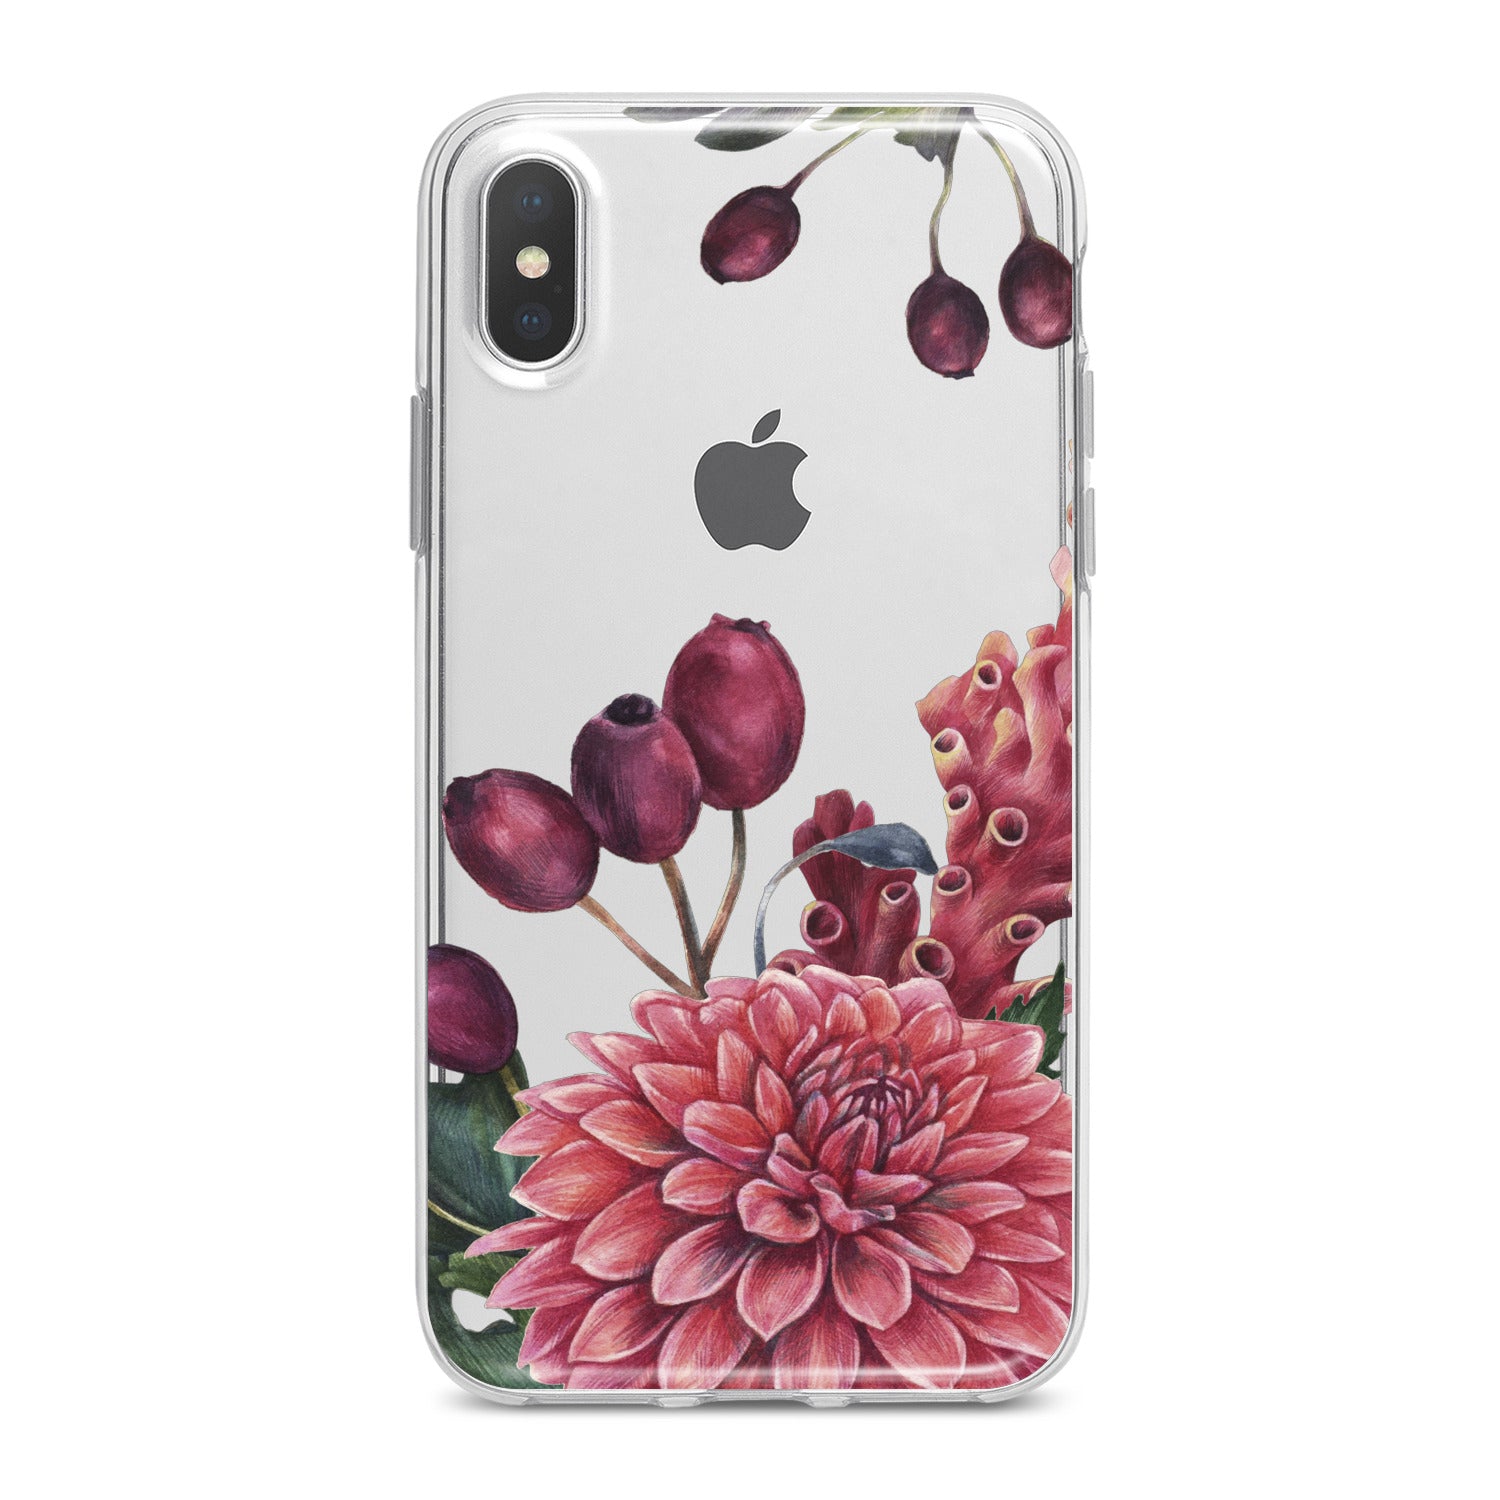 Lex Altern Beautiful Сhrysanthemum Phone Case for your iPhone & Android phone.